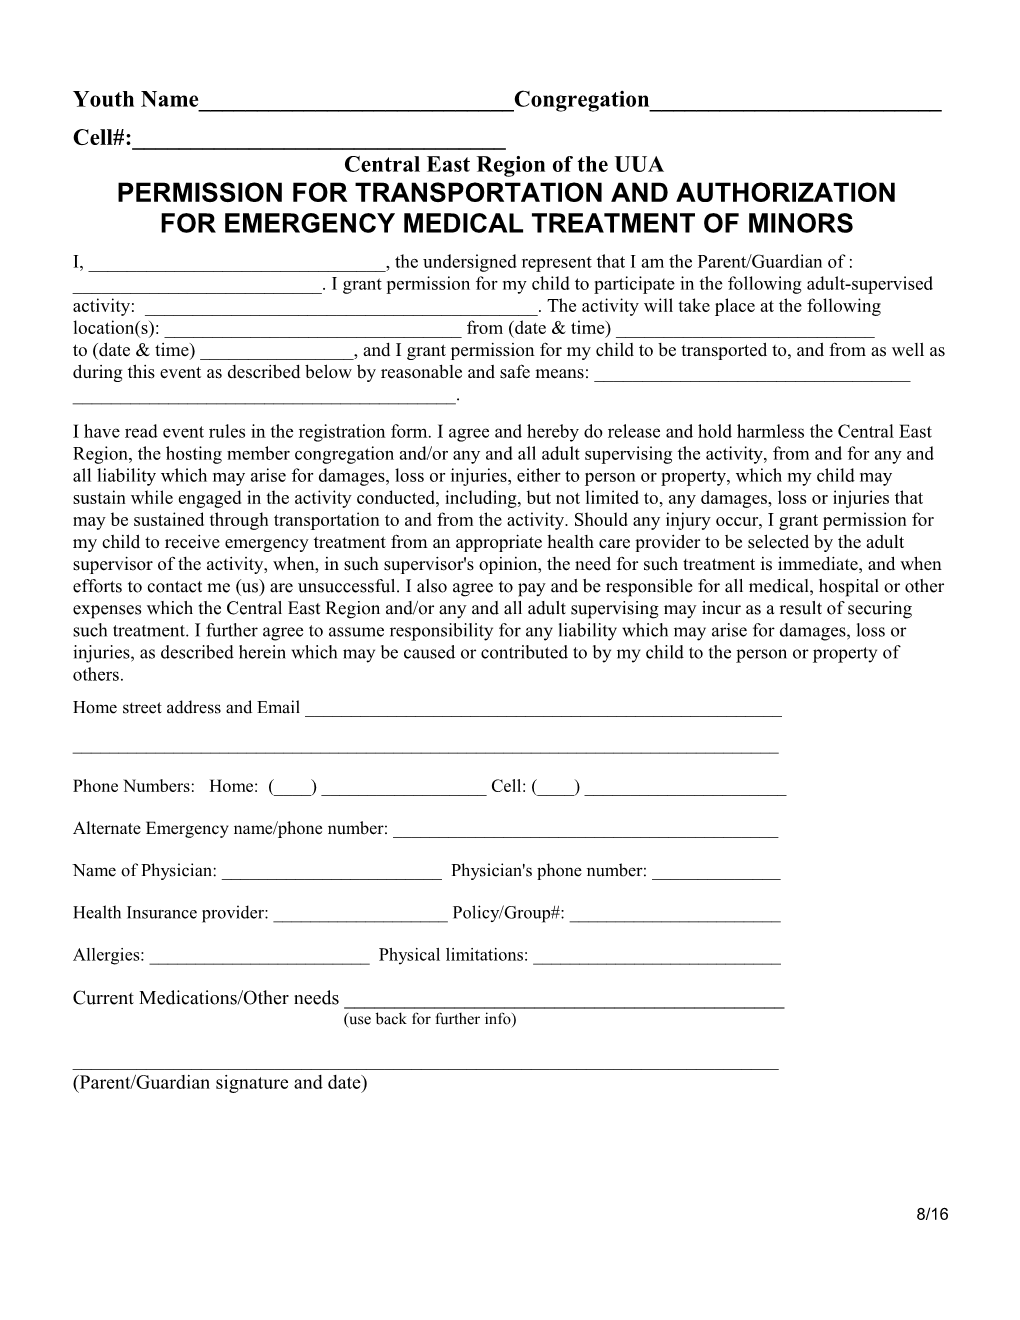 Permission for Transportation and Authorization